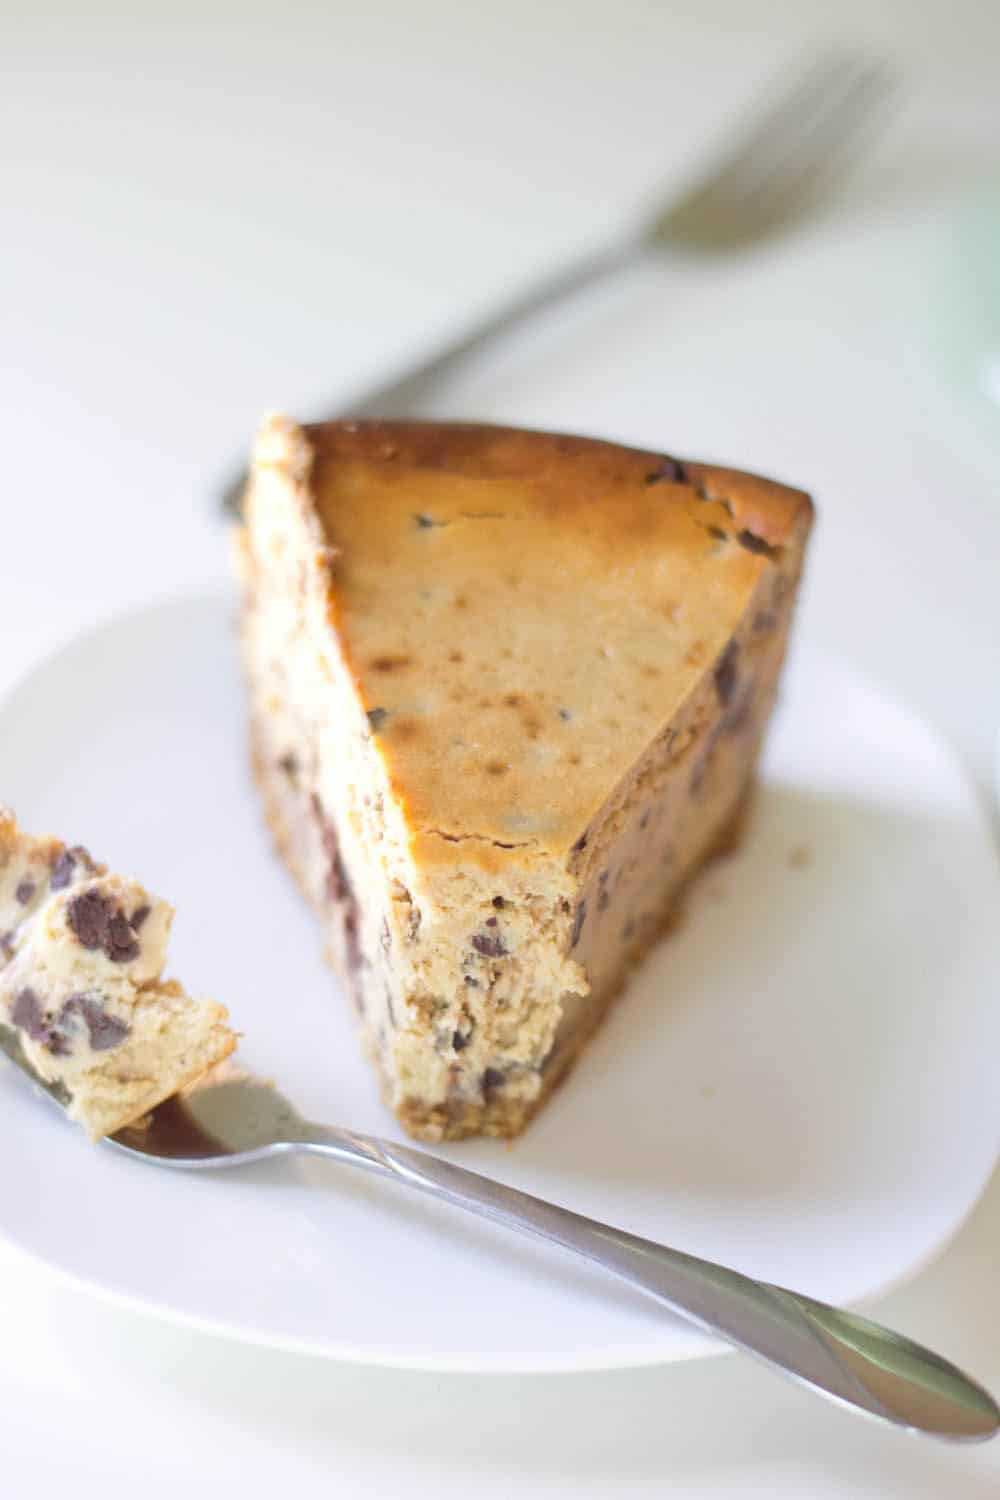 This amazing cheesecake recipe will be the best you've ever tasted! Think decadent cookie dough in a rich and creamy base. It's a definite crowd pleaser.